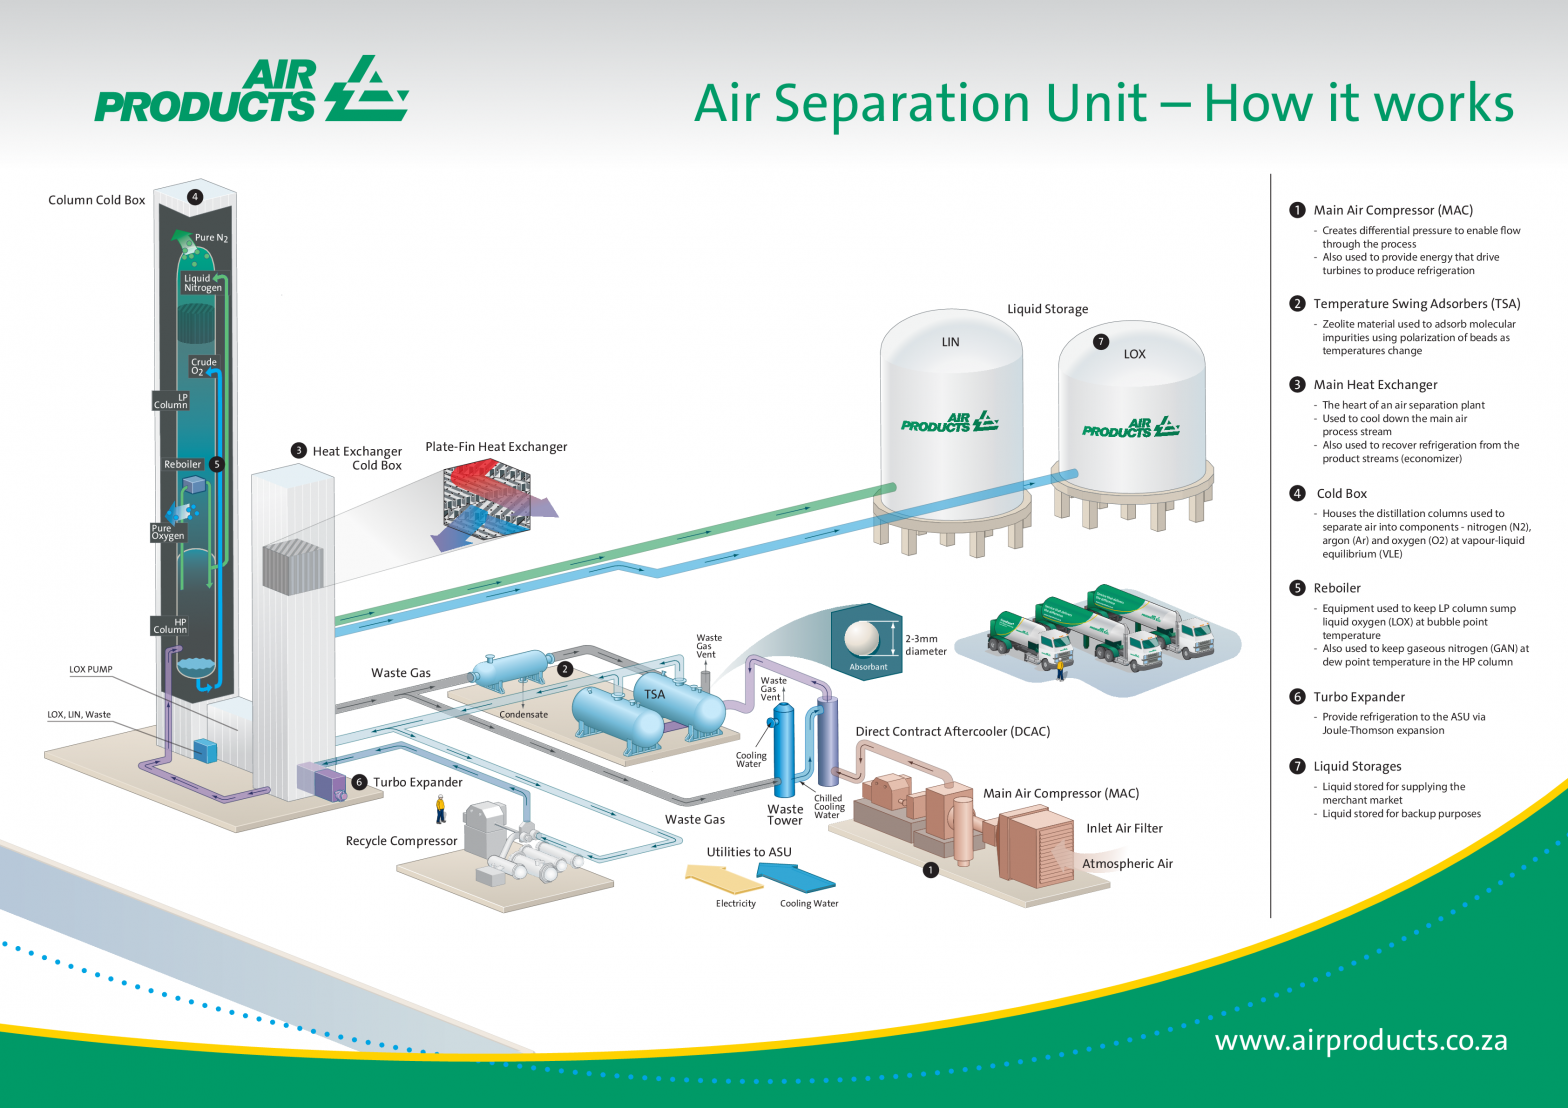 Product unit. Air Separation Unit. Air products Россия. Asu Air products. Air Separation Cold Box.